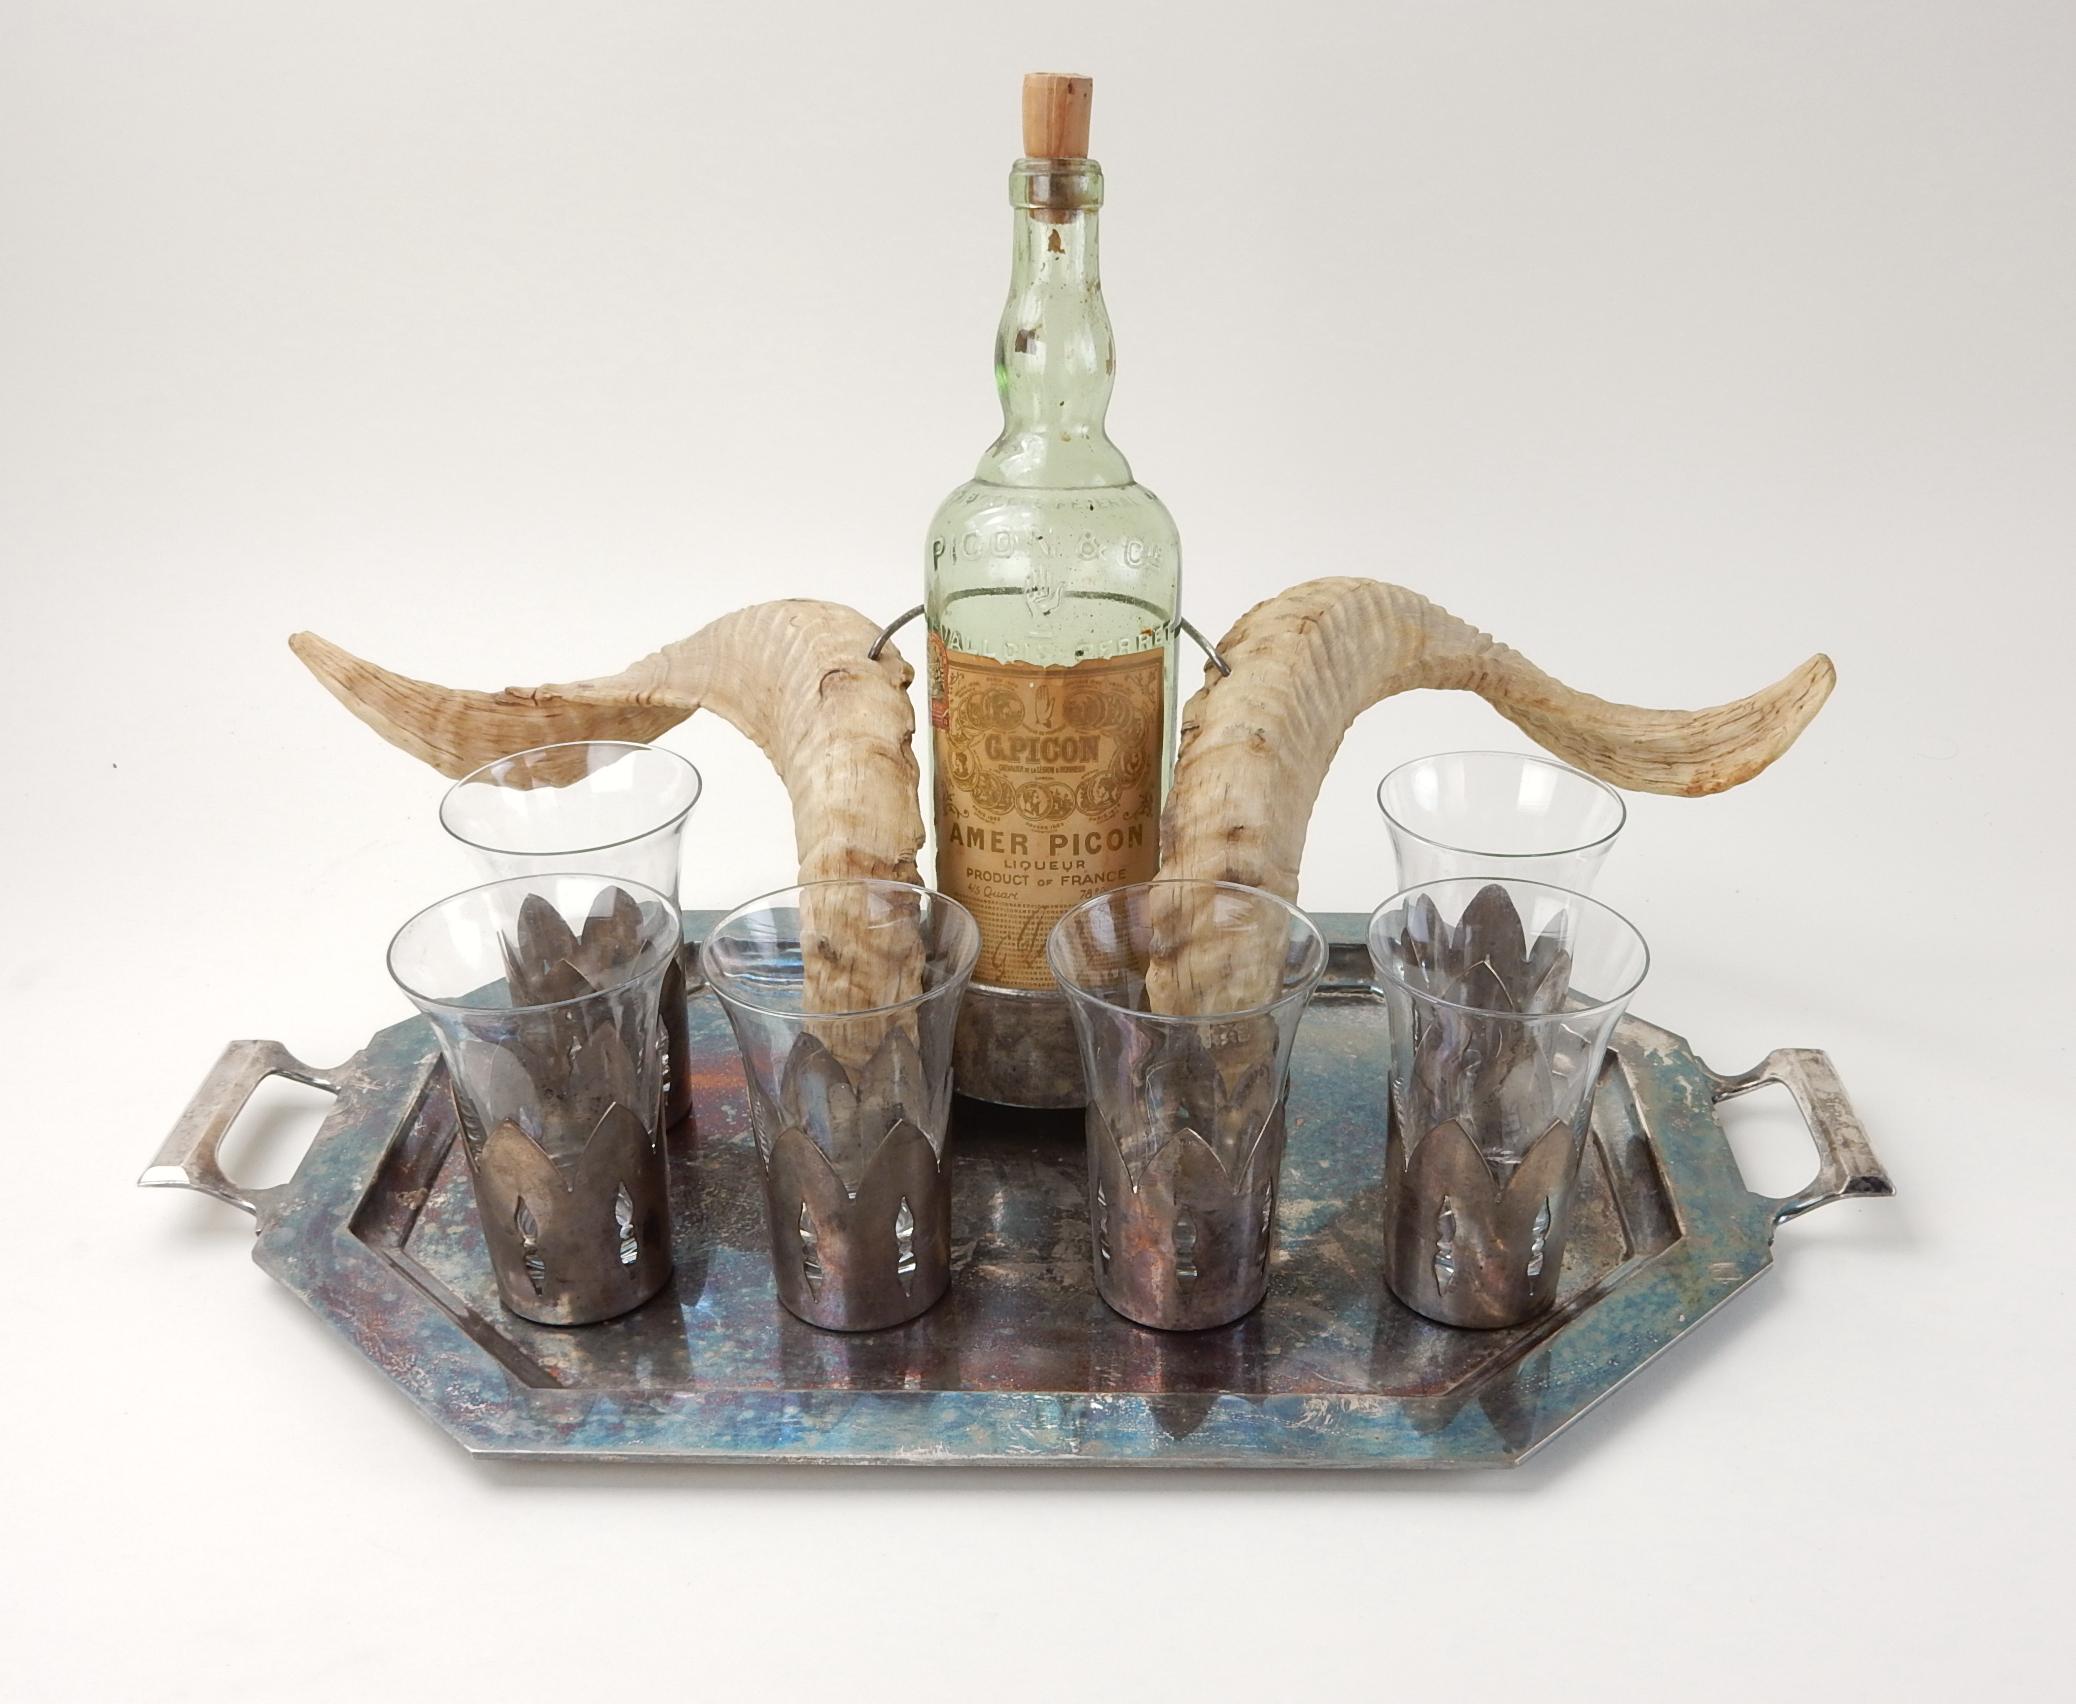 From a multi generational Basque family estate this remarkable bar set
consisting of exotic horn bottle/decanter holder, 6 glasses with pierced metal holders and a serving tray.
Present bottle, as found, being a French Picon, circa 1920s.
Unique